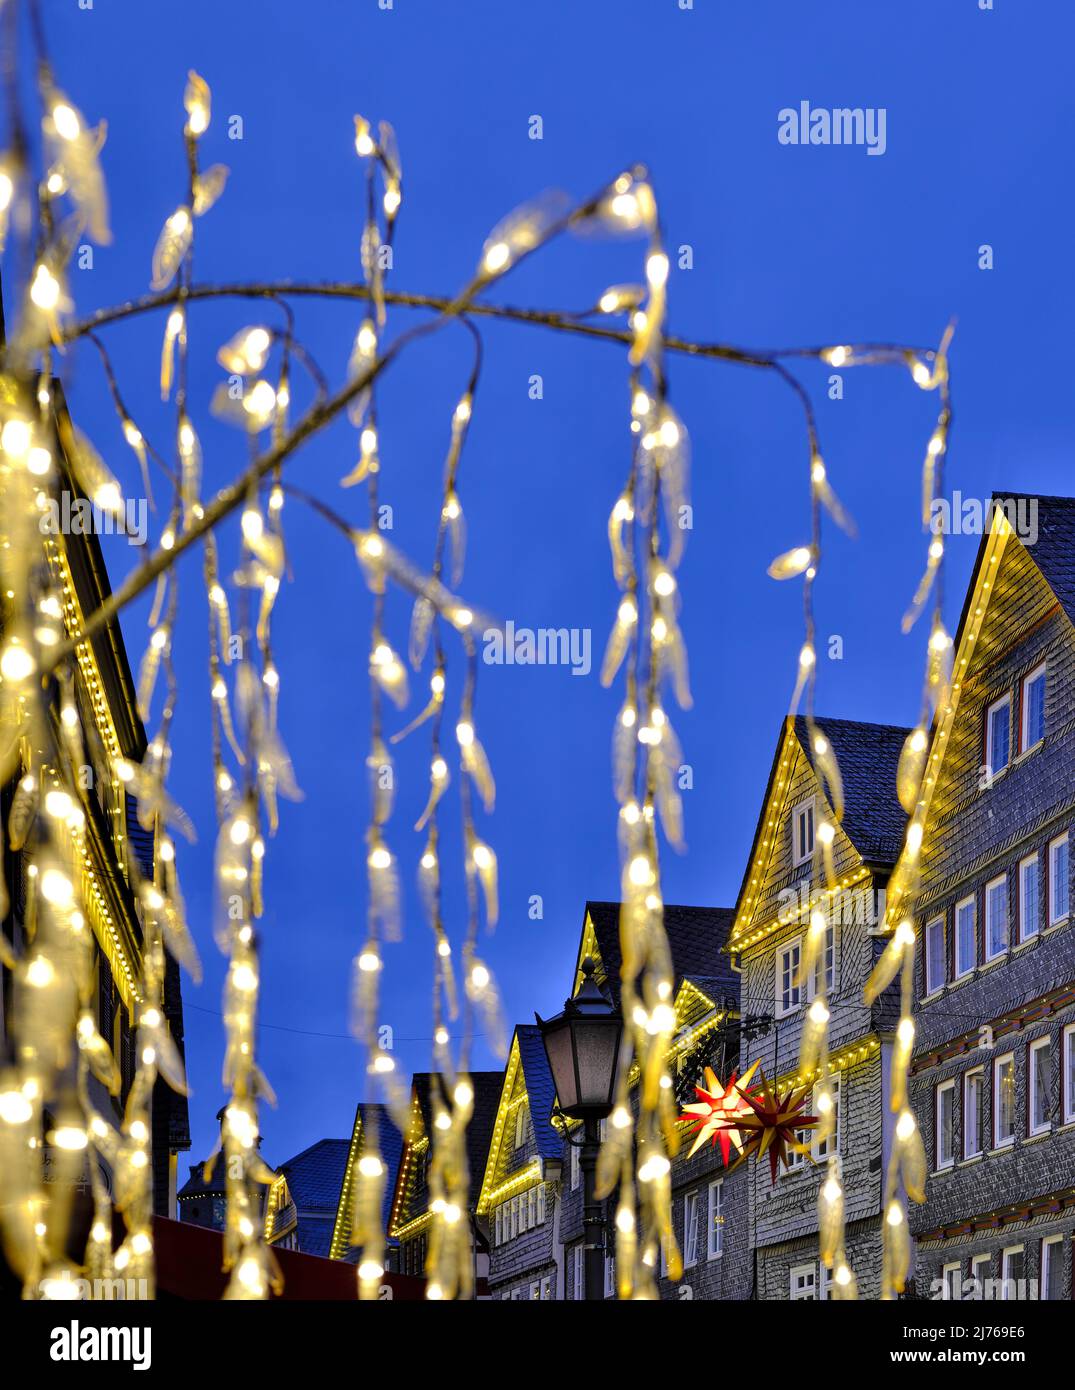 Europe, Germany, Hesse, city Herborn, historical old town, Christmas, Christmas lights, ice decoration Stock Photo